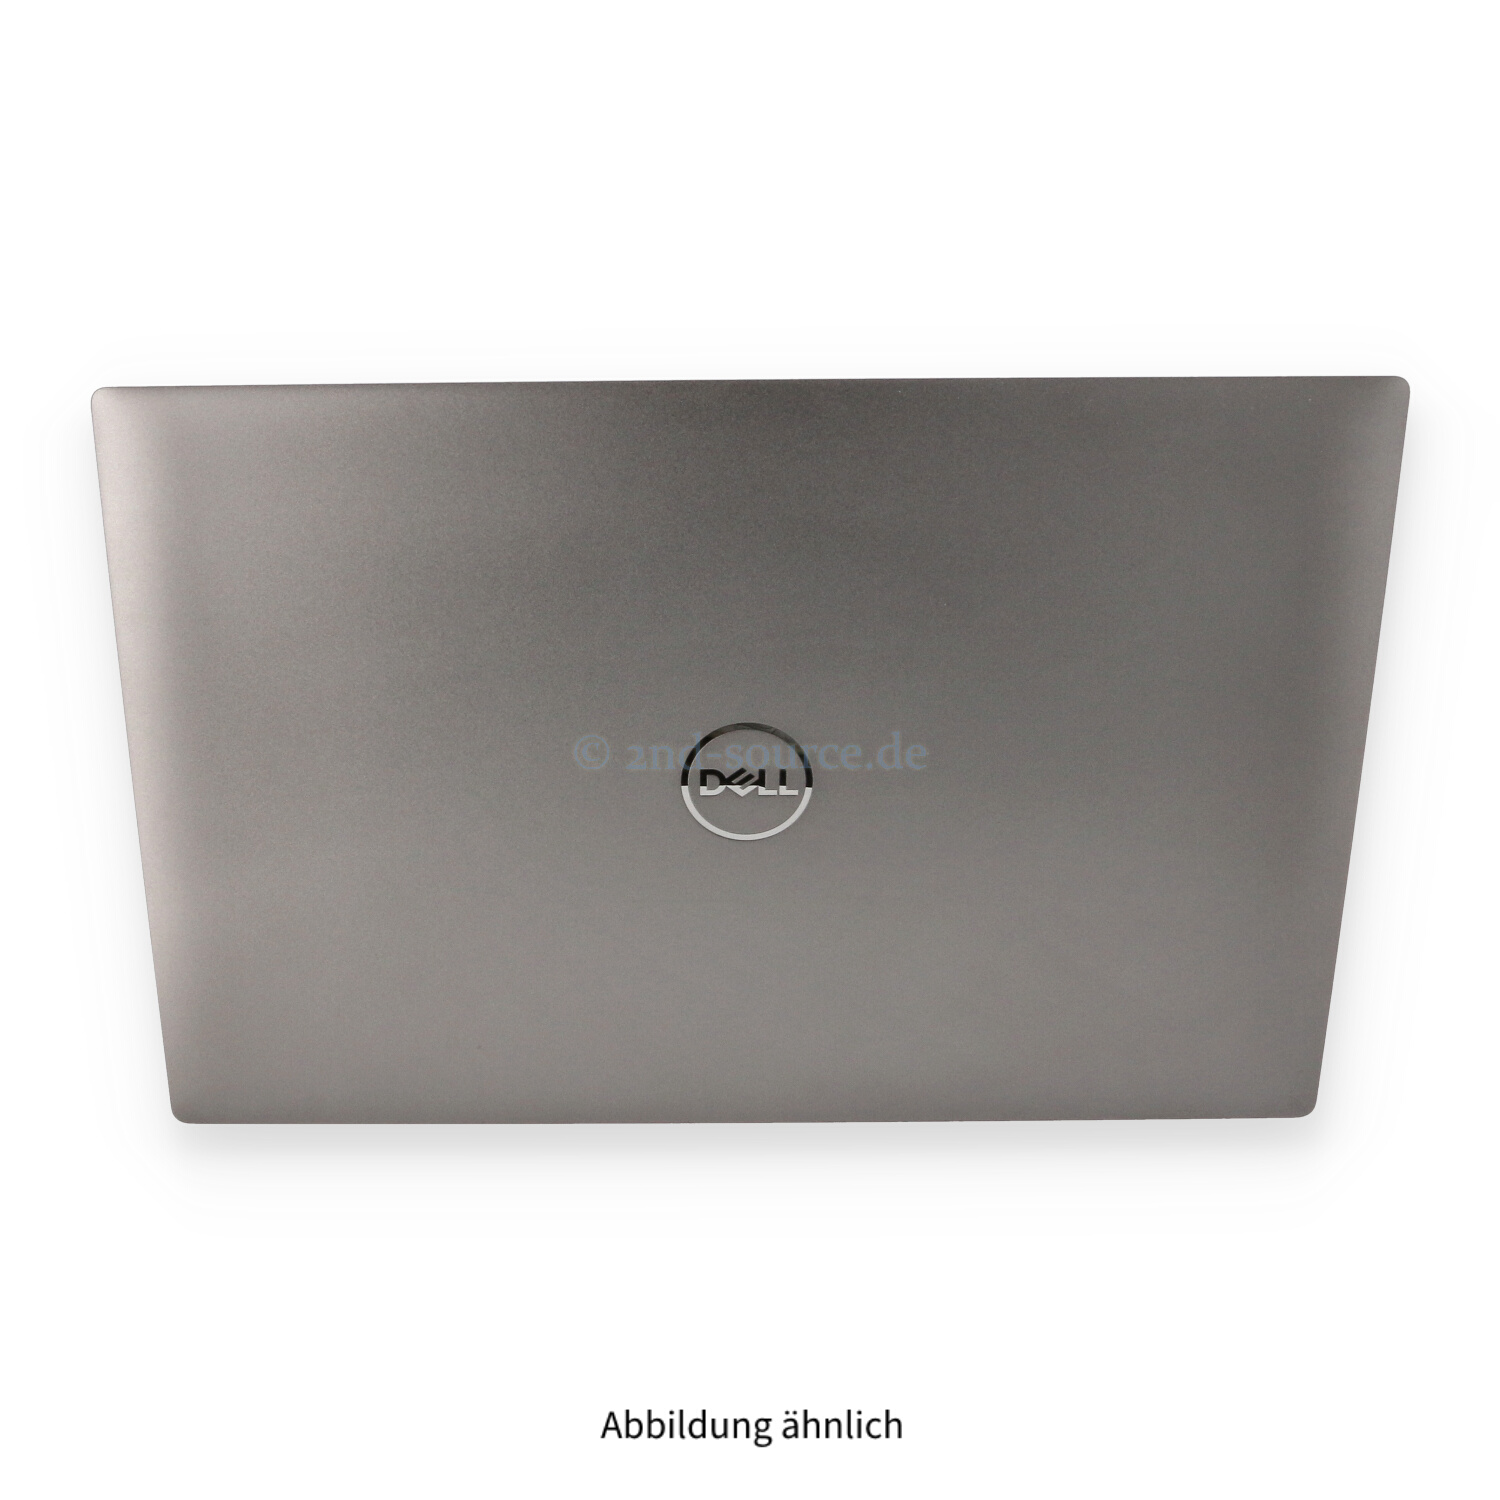 Dell Precision 5680 Mobile Workstation 16'' 1P i5-13600H up to 4.80GHz 12C 16GB LPDDR5 256GB NVMe M.2 SSD QWERTY - ProSupport bis August 2026